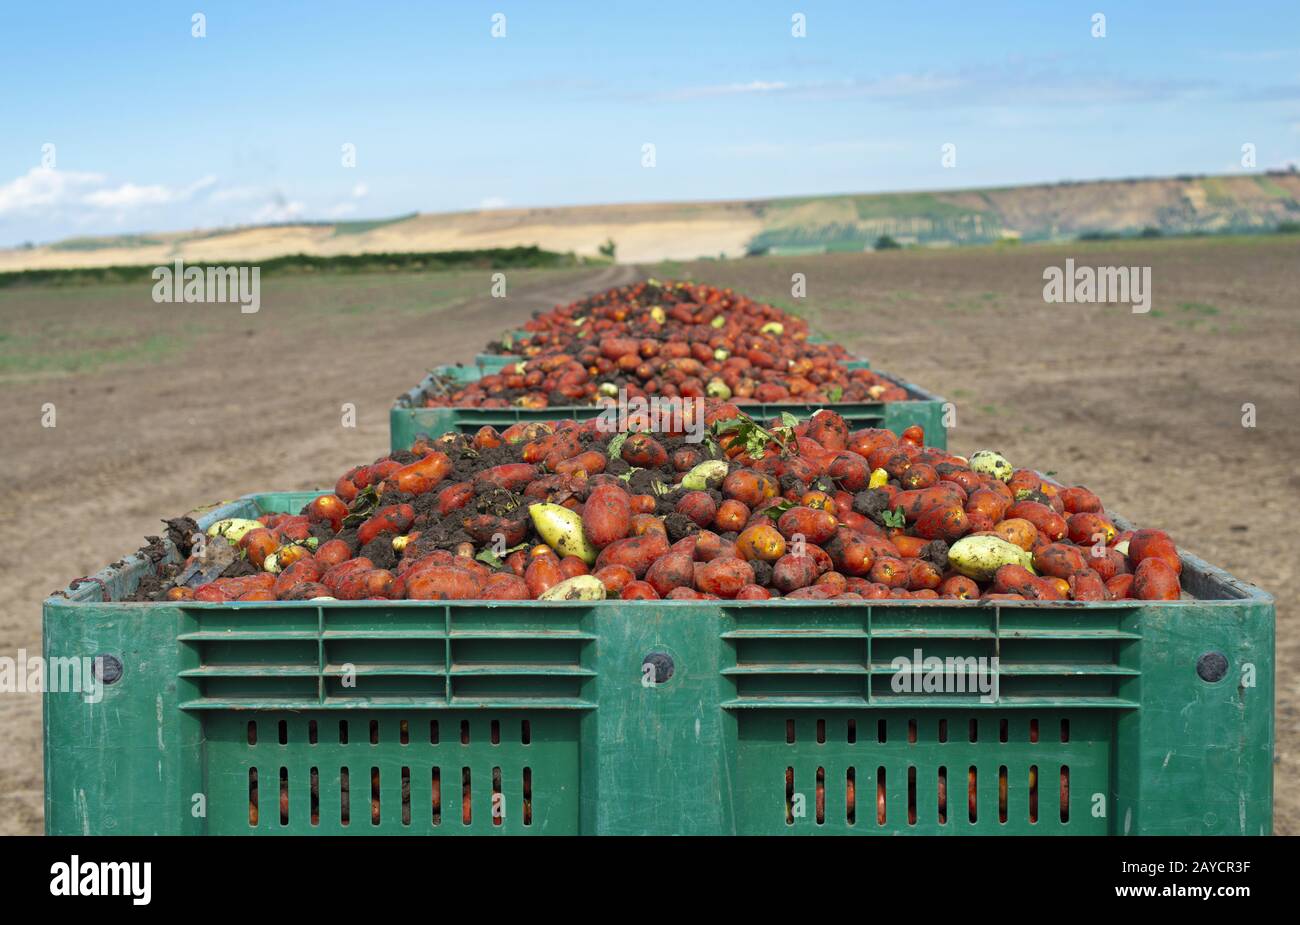 Tomatoes for canning. Agriculture land and crates with tomatoes. Stock Photo